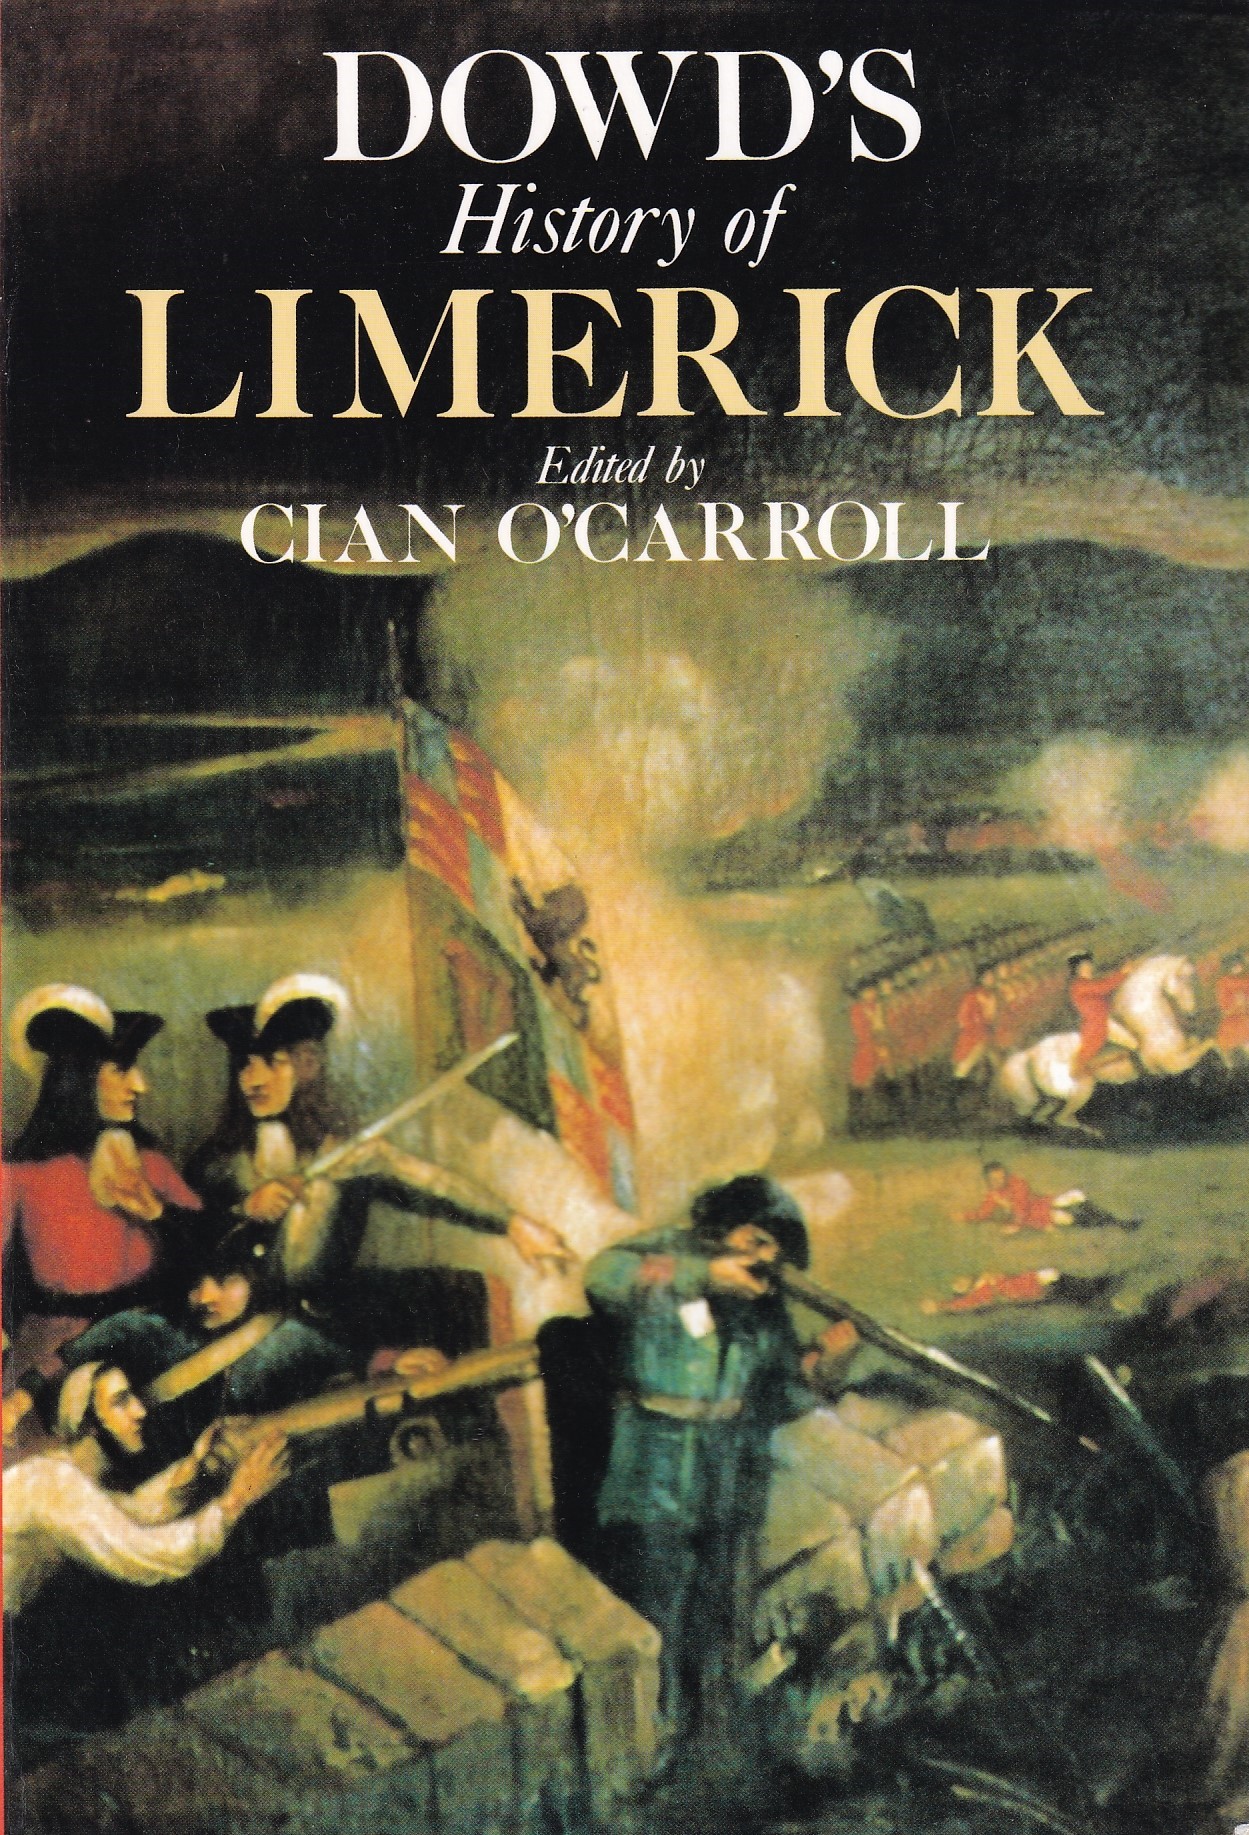 Dowd’s History of Limerick by James Dowd